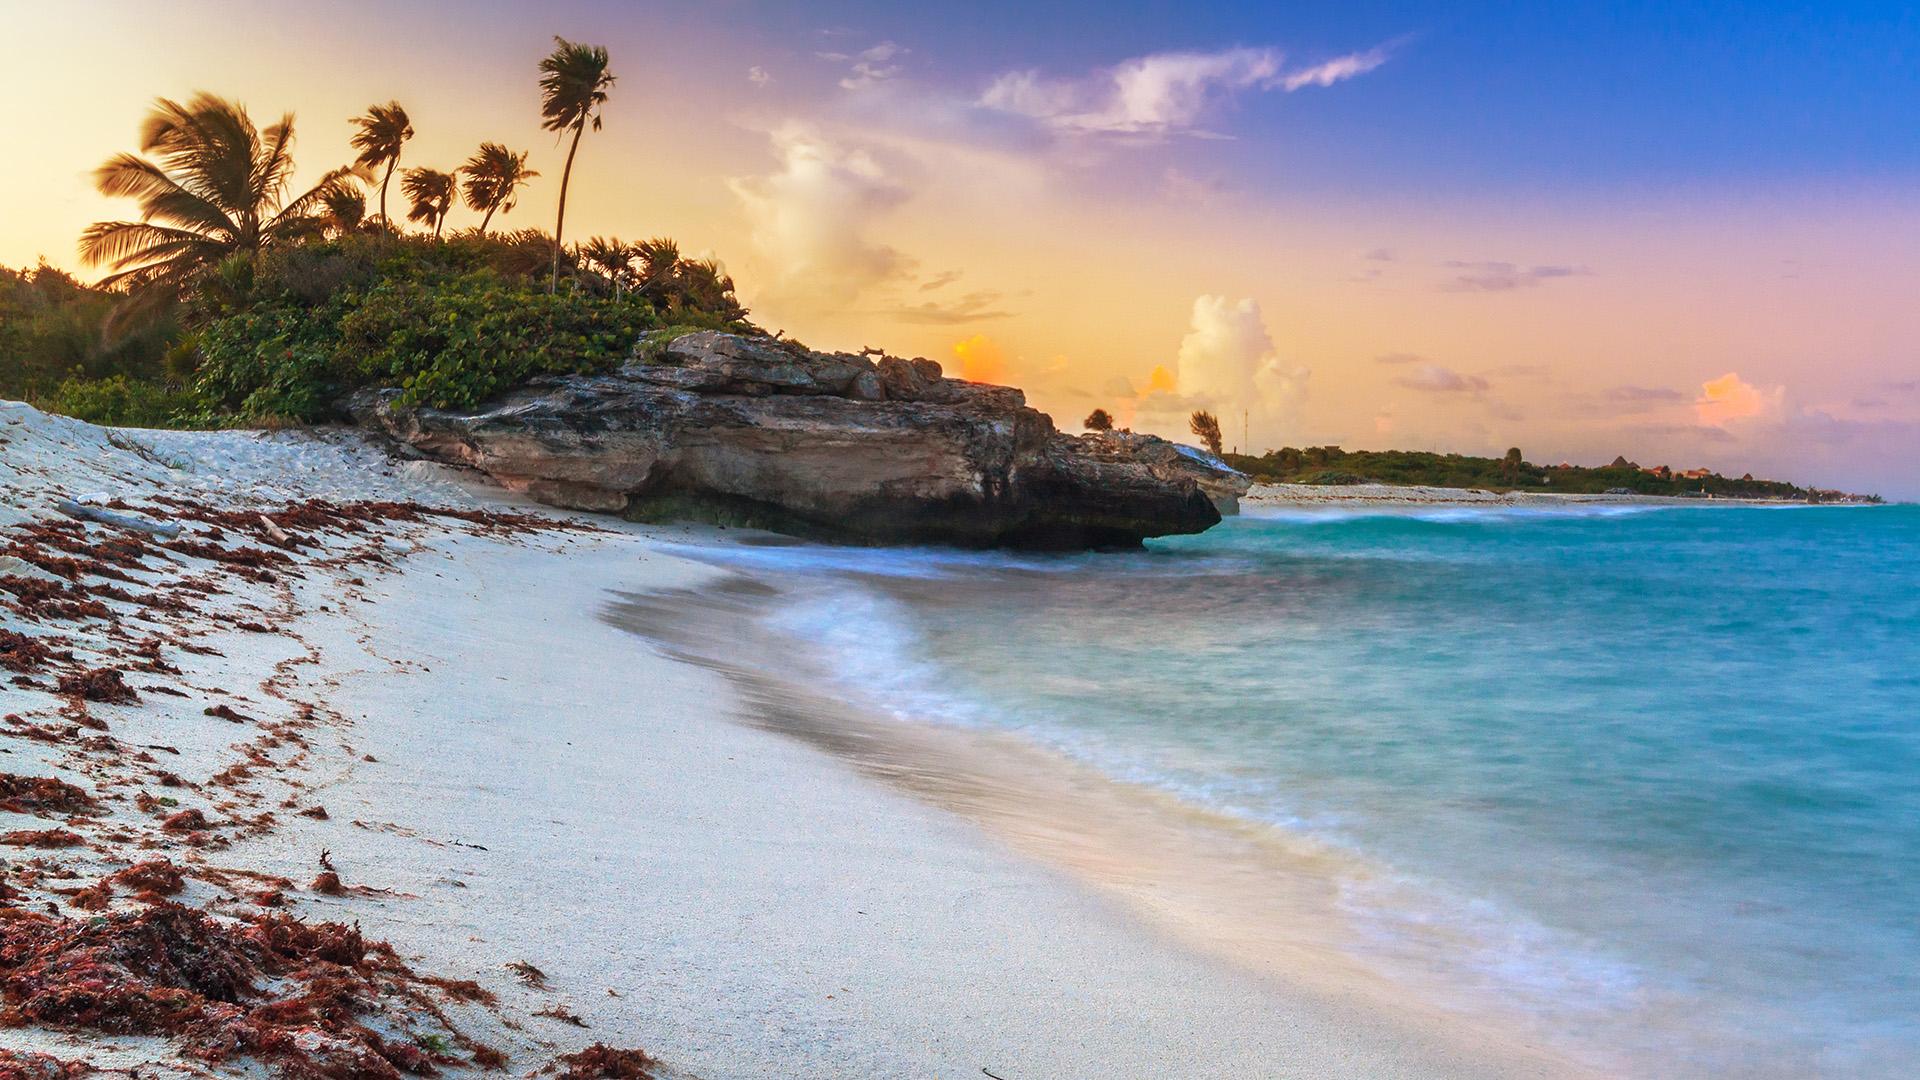 The Official Beach Guide to Playa del Carmen. Beach Vacations & Resorts